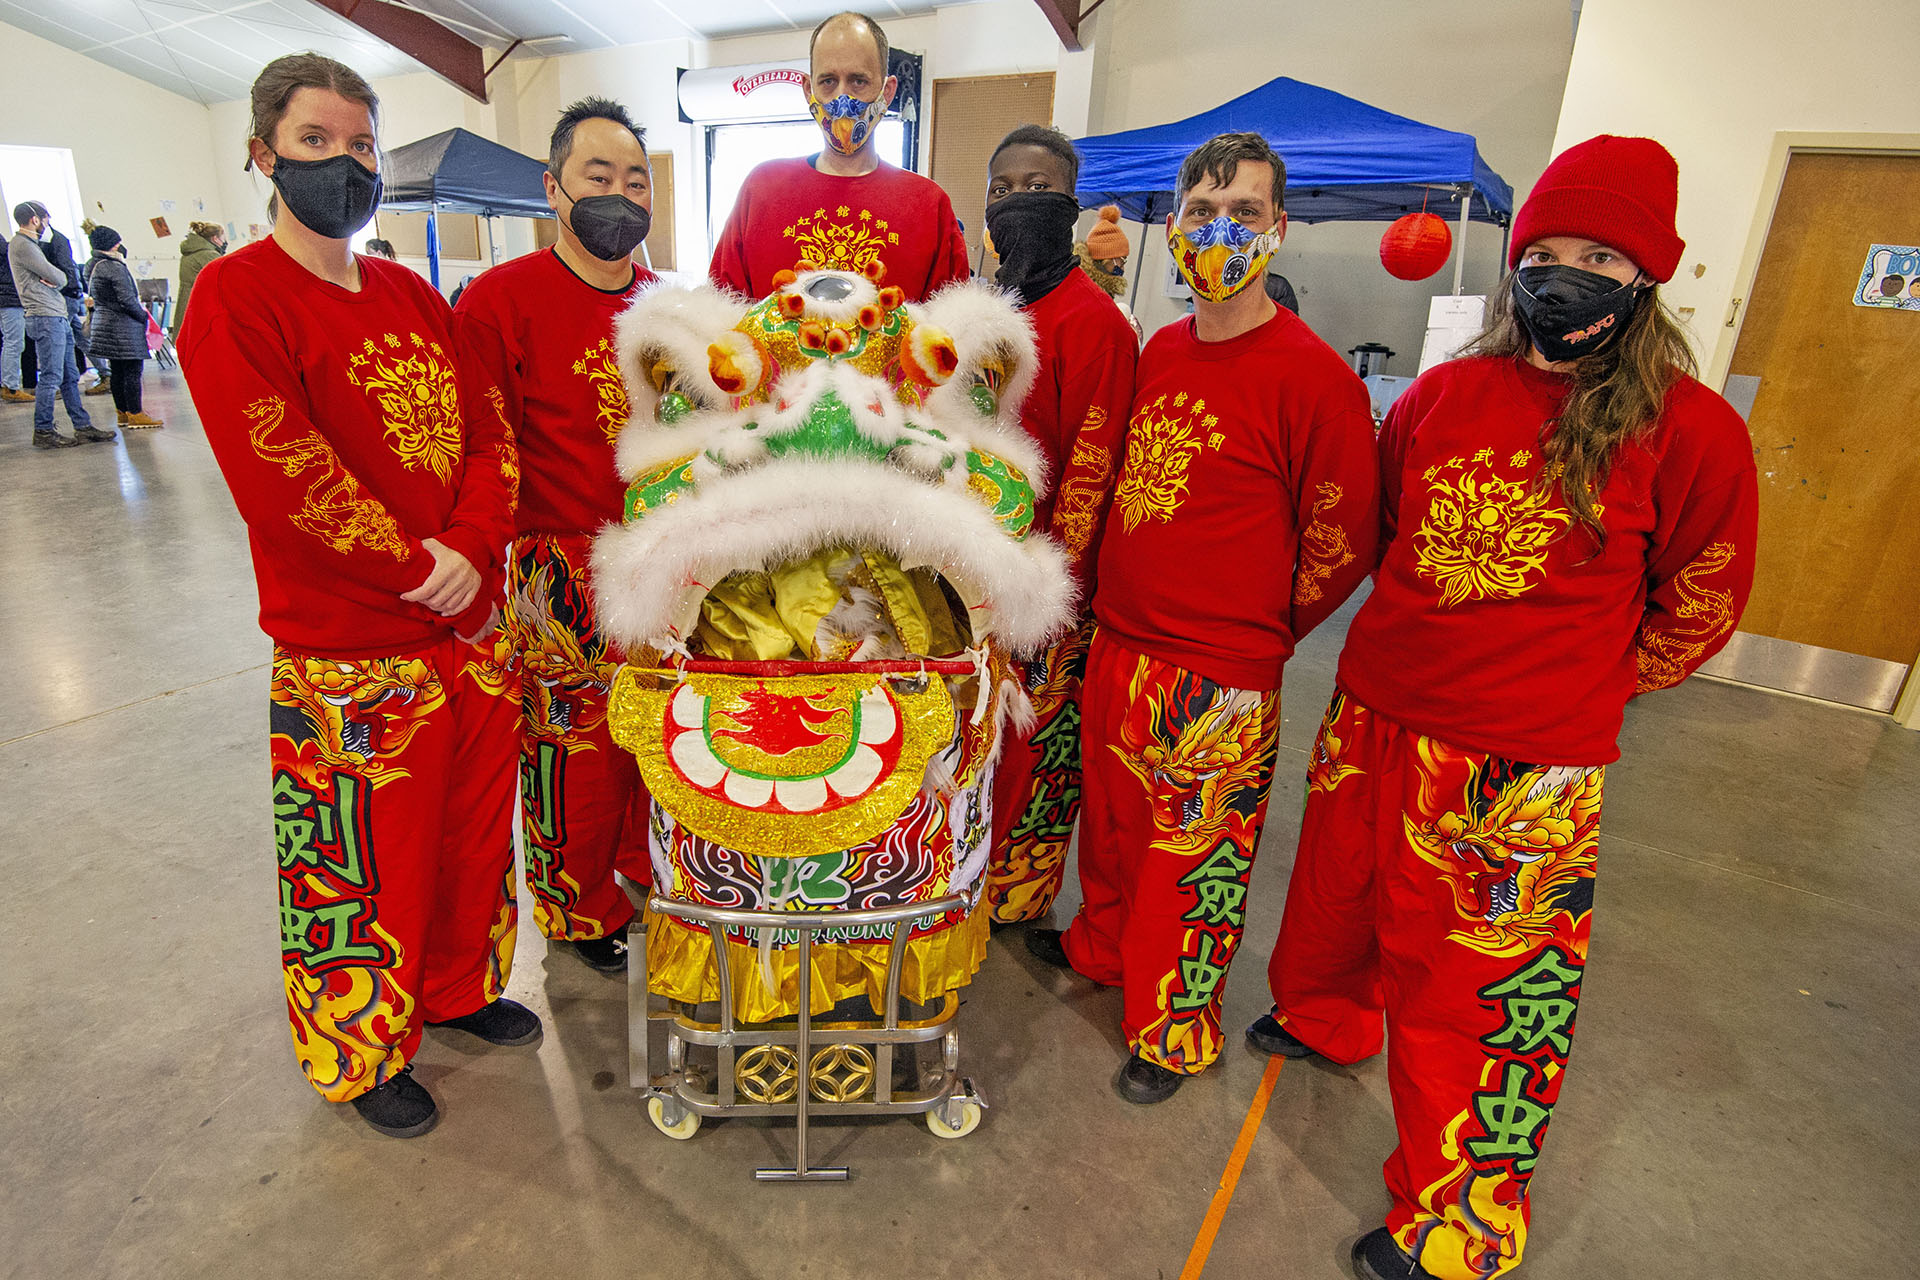 Members of Chein Hong School of Kung Fu pose for a photo before performing a Lion Dance during the Lunar New Year Celebration at Legacy Park in Decatur on Saturday, Jan. 29. 2022. Photo by Dean Hesse.